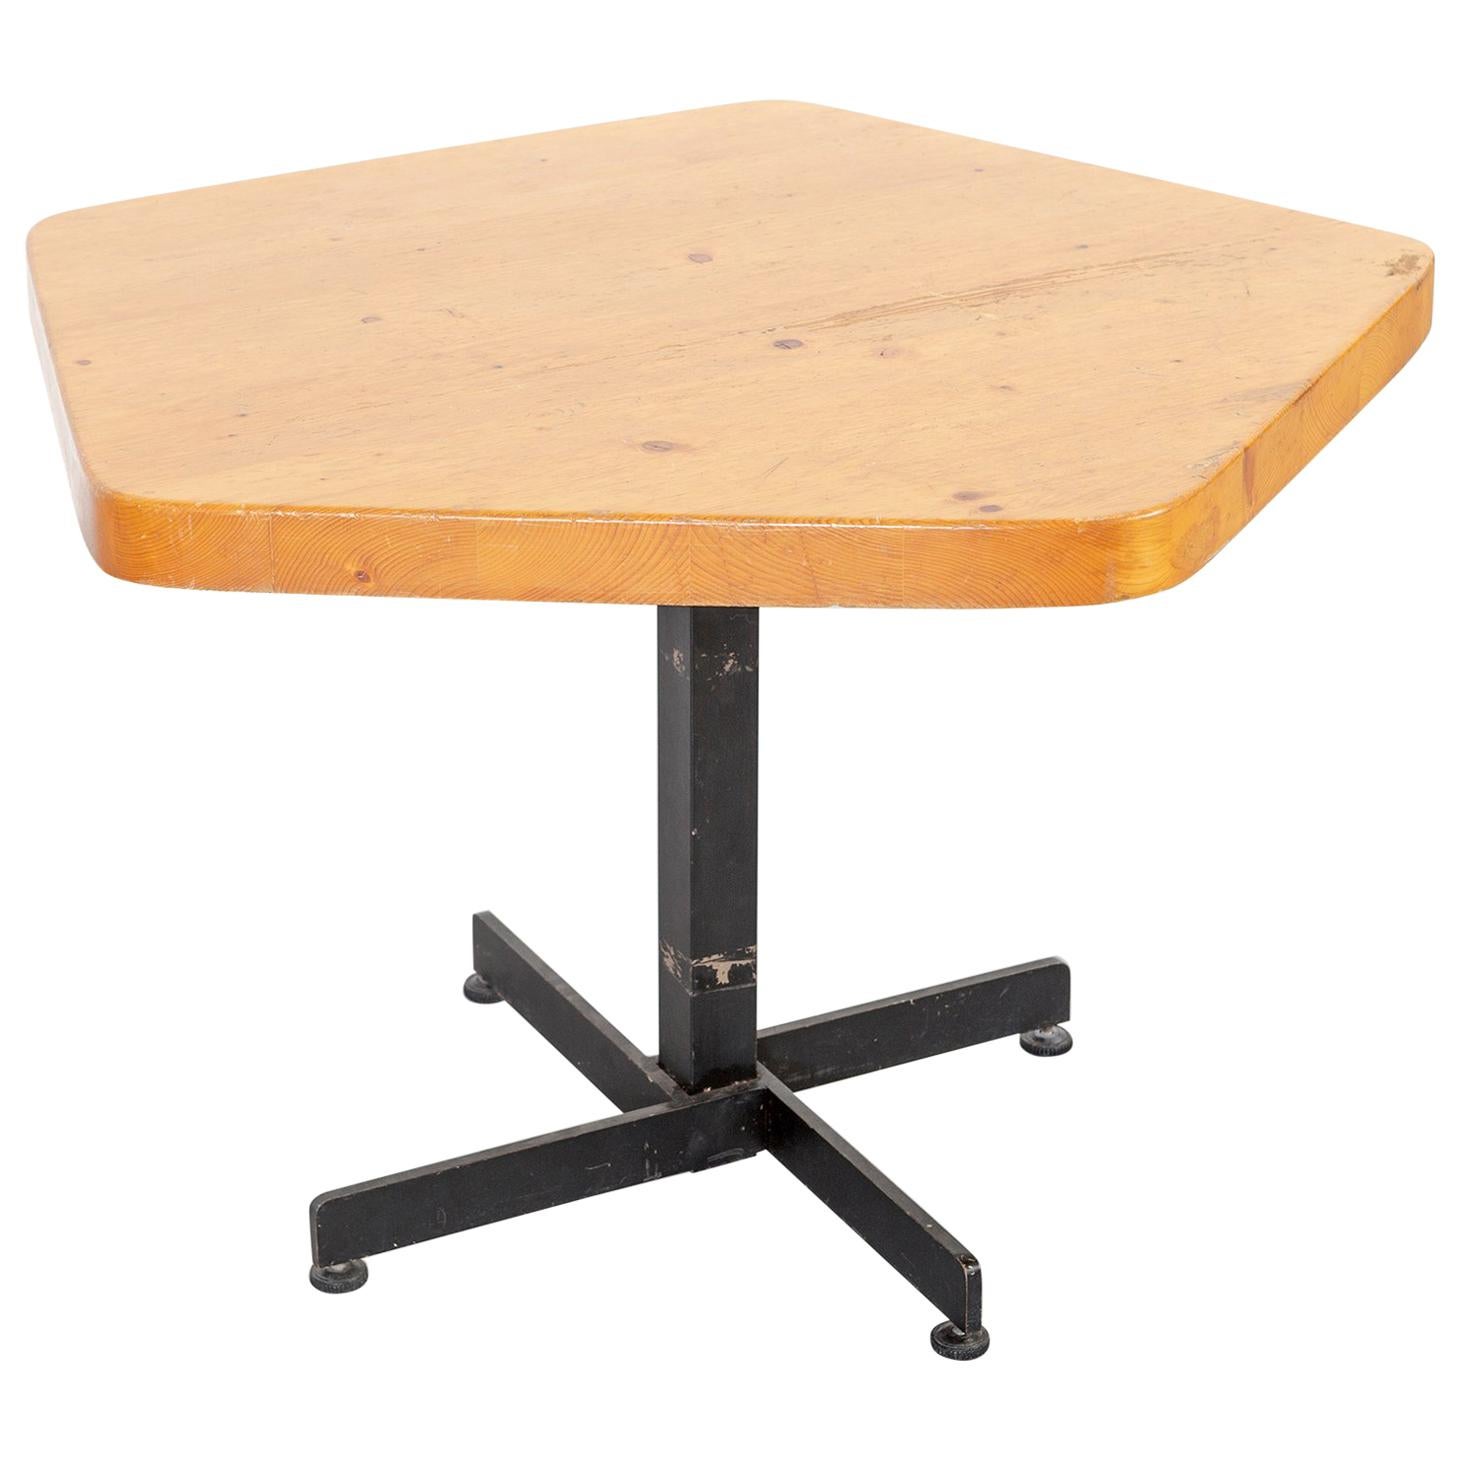 Charlotte Perriand Mid-Century Modern Adjustable Pentagonal Table for Les Arcs For Sale